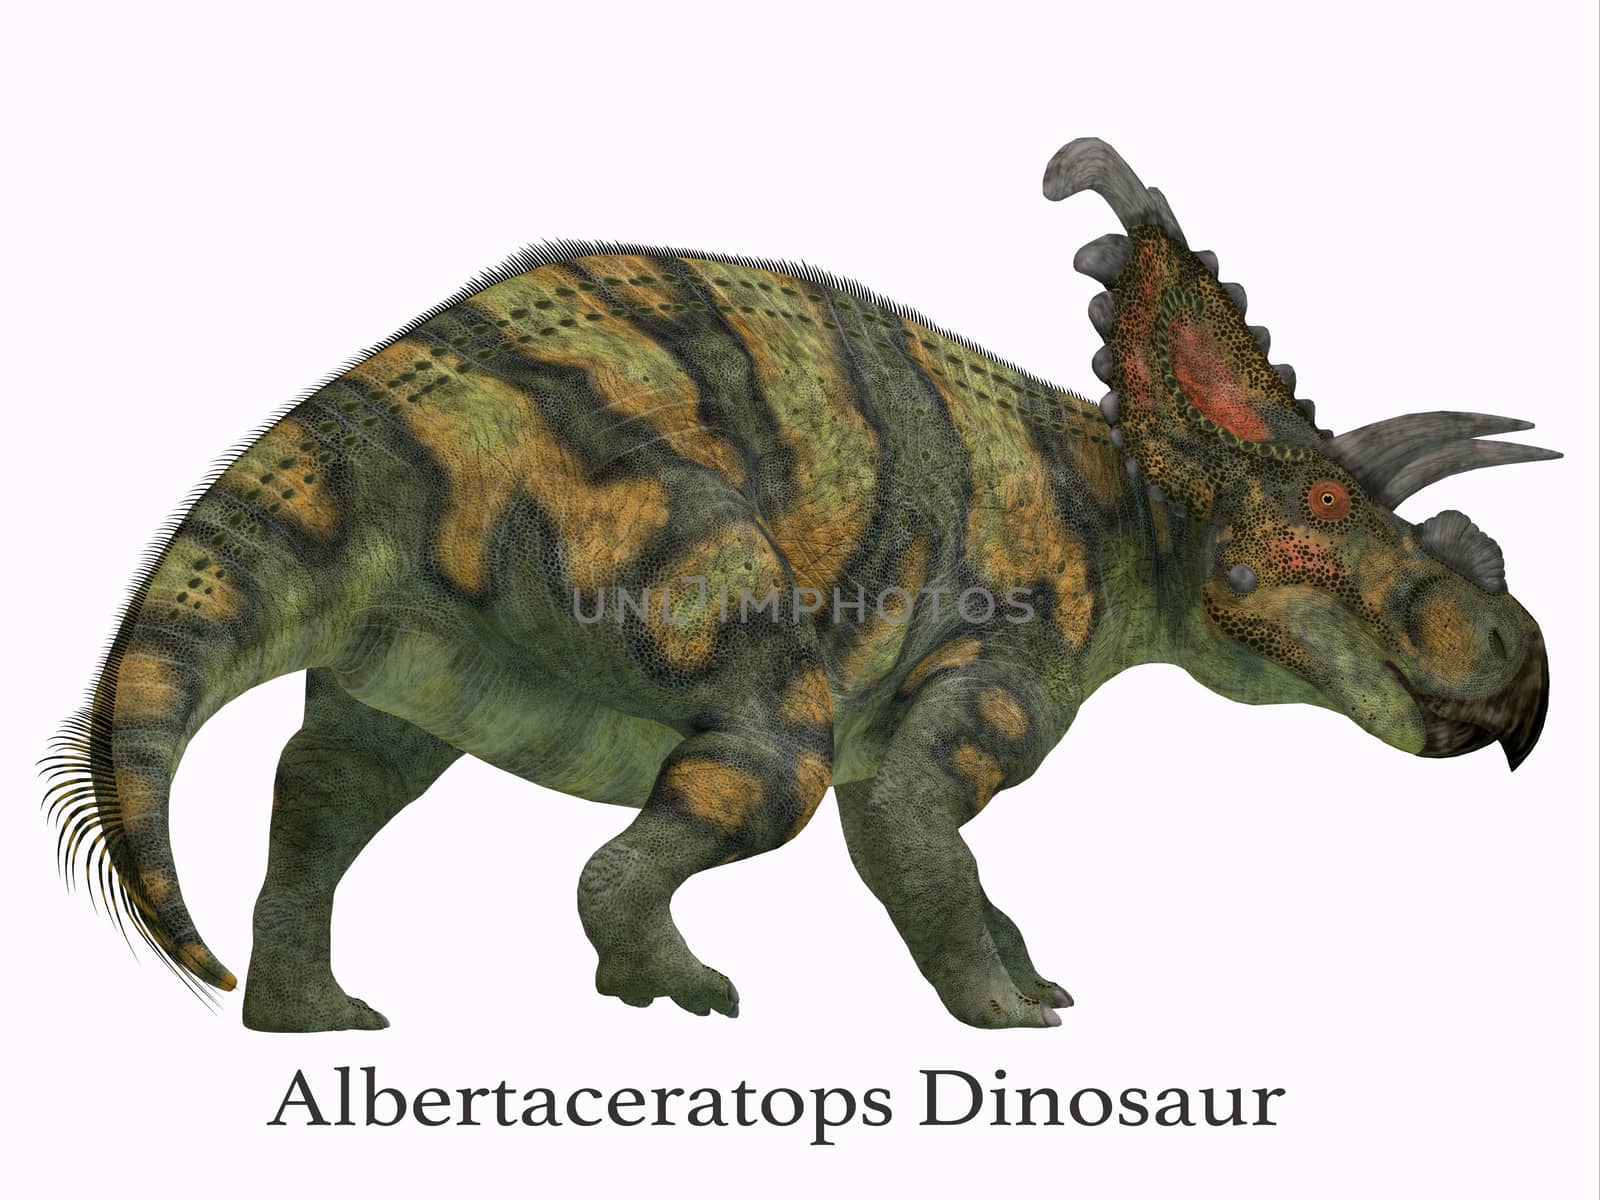 Albertaceratops Dinosaur Tail with Font by Catmando